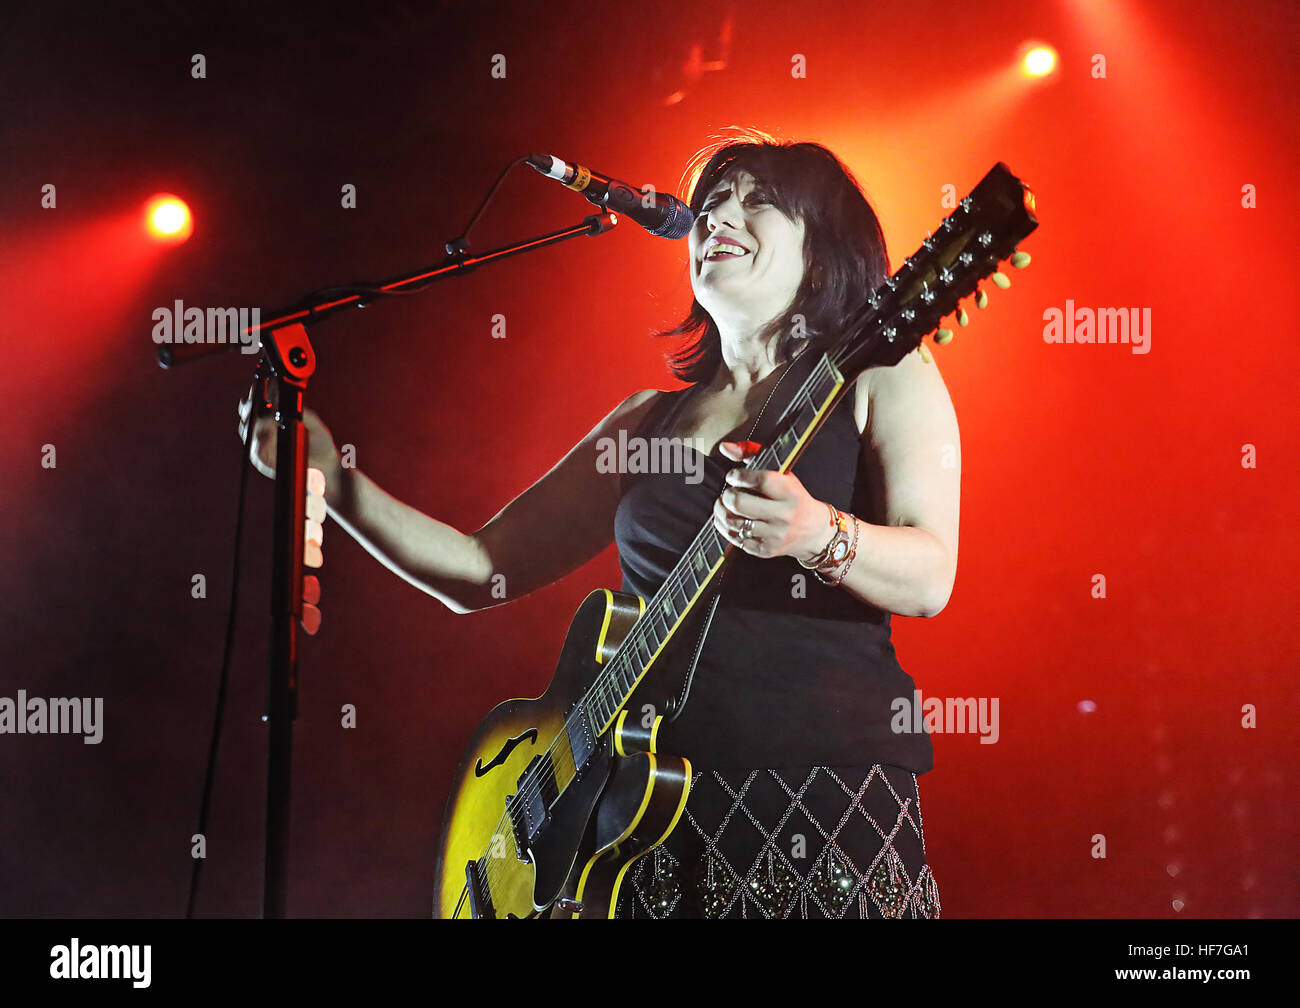 Lush Performing Their Last Ever Gig At Manchester Academy Featuring Lush Miki Berenyi Where Manchester United Kingdom When 25 Nov 16 Stock Photo Alamy